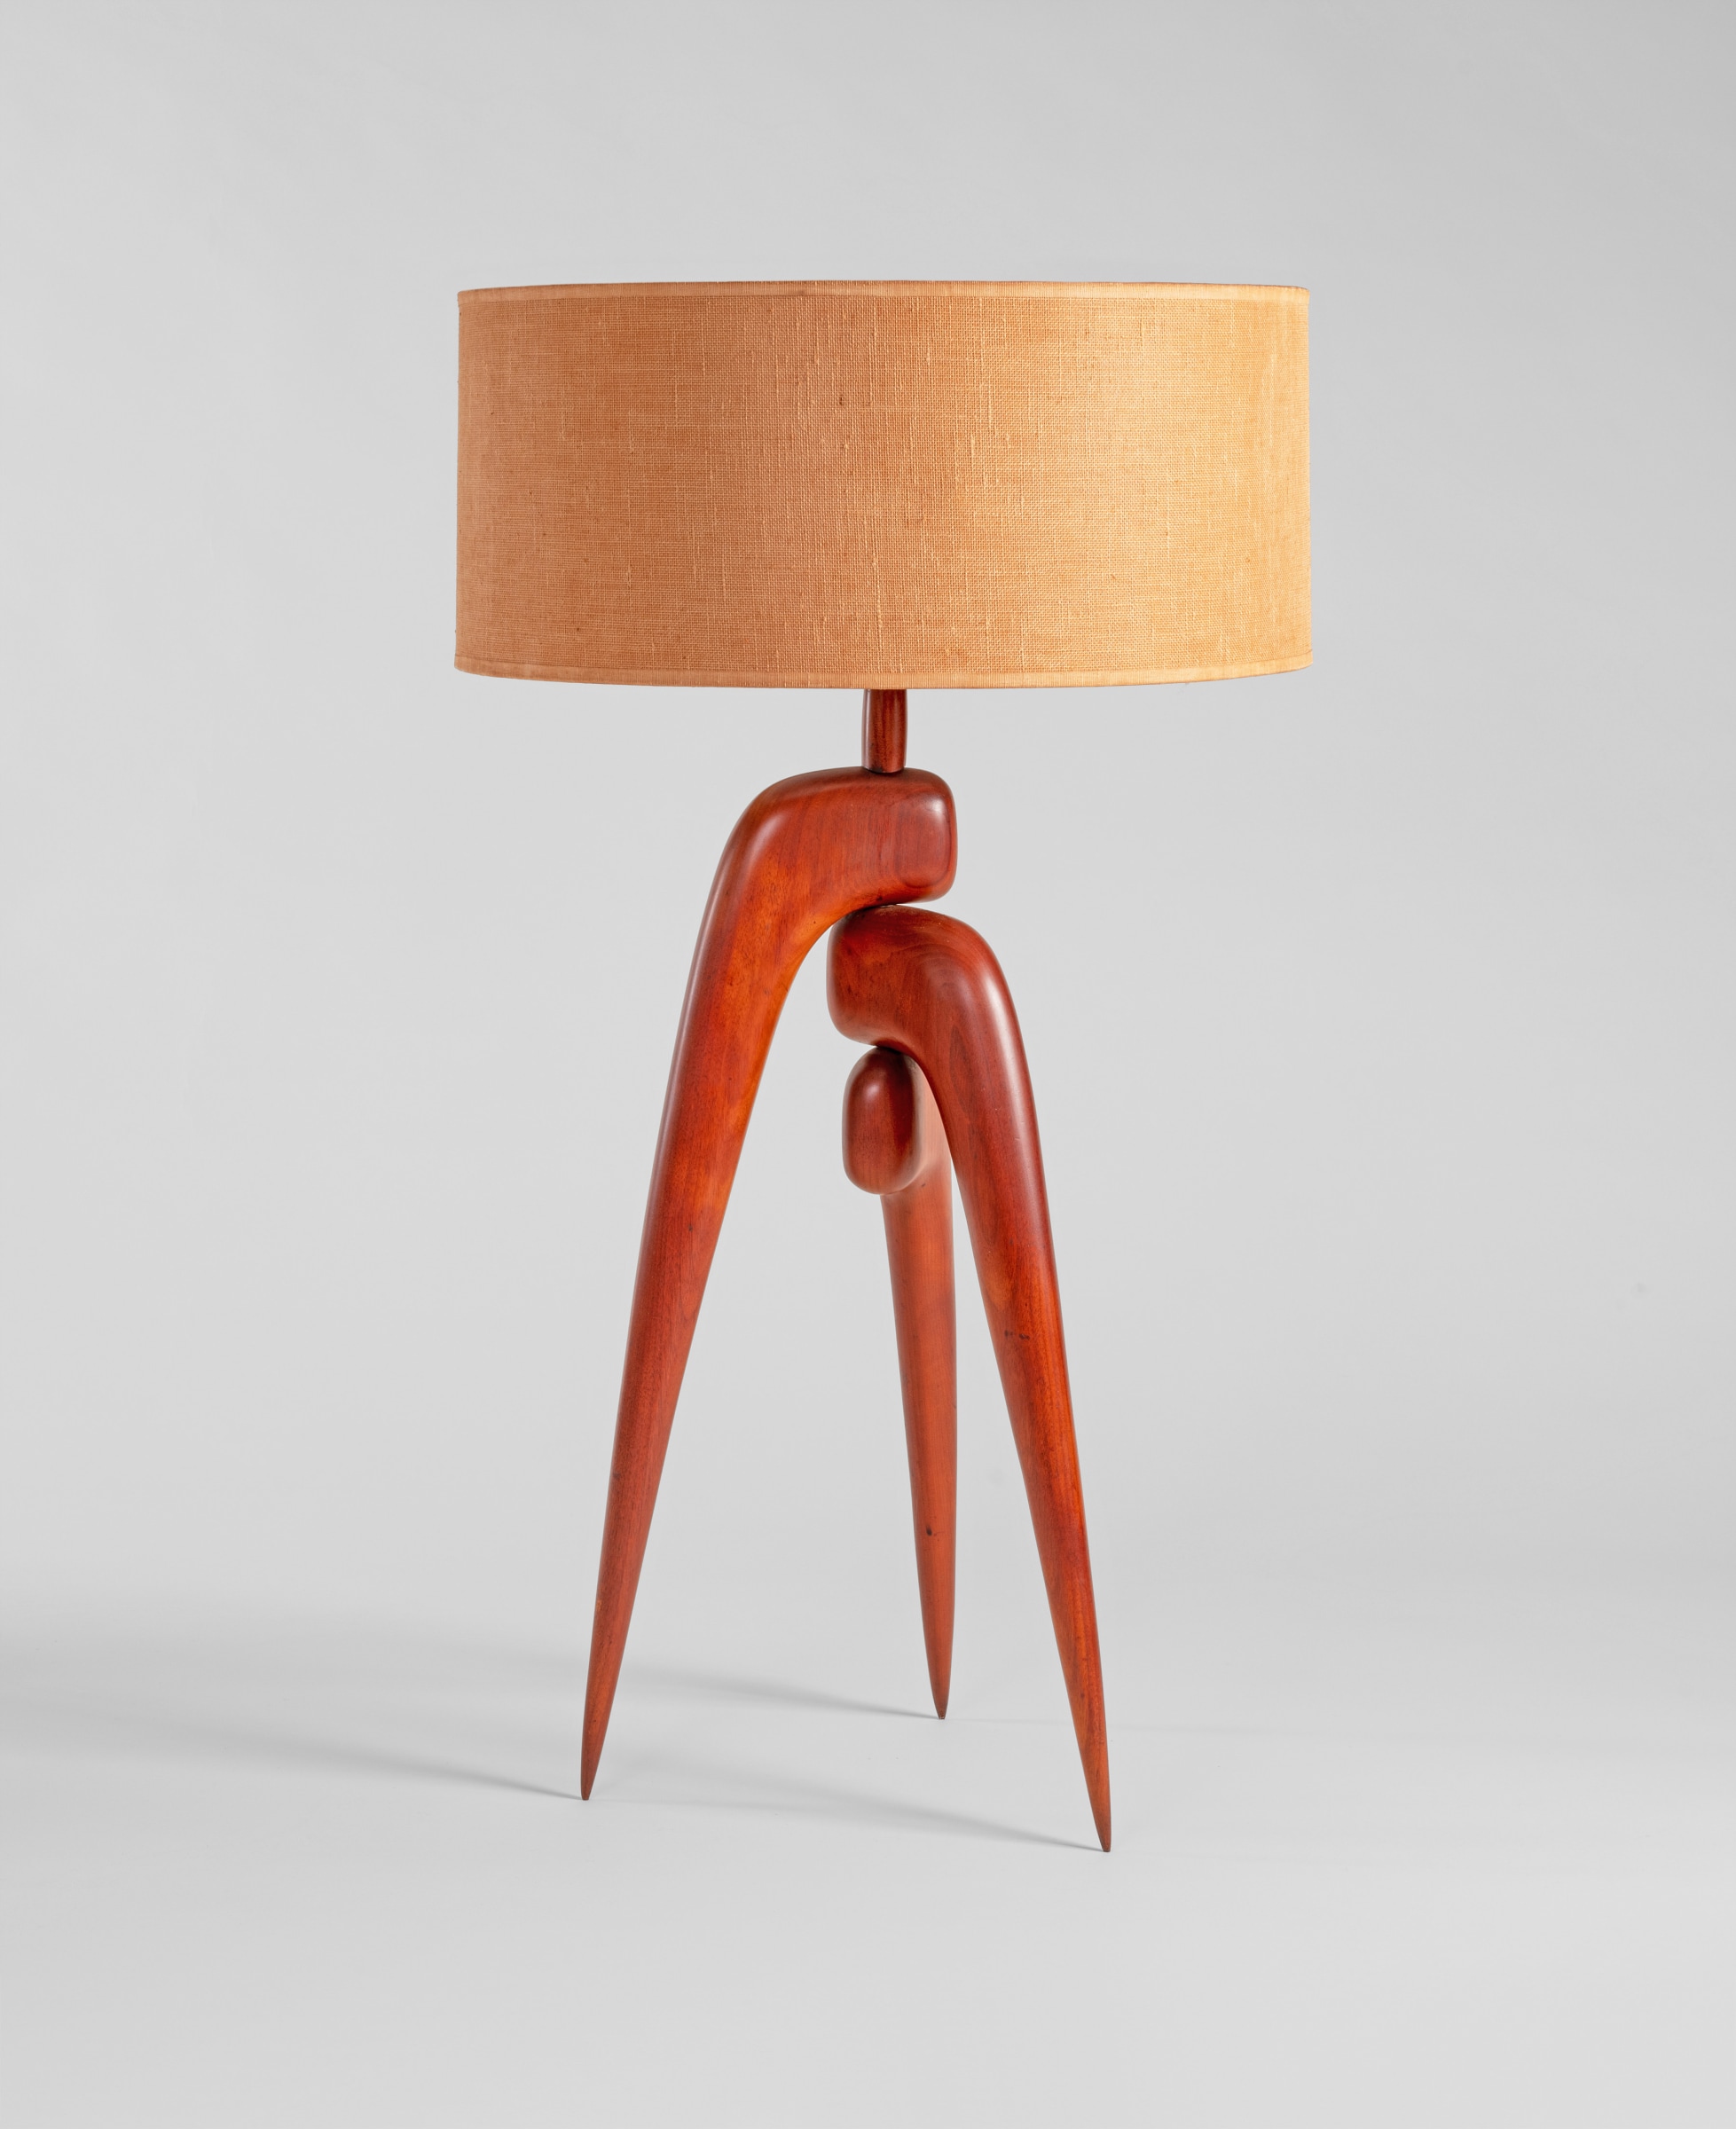 a rare midcentury modern table lamp by new hope designed phil powell, the wooden base an unusual sculpted tripod of rounded forms, supporting a round linen shade in natural tone